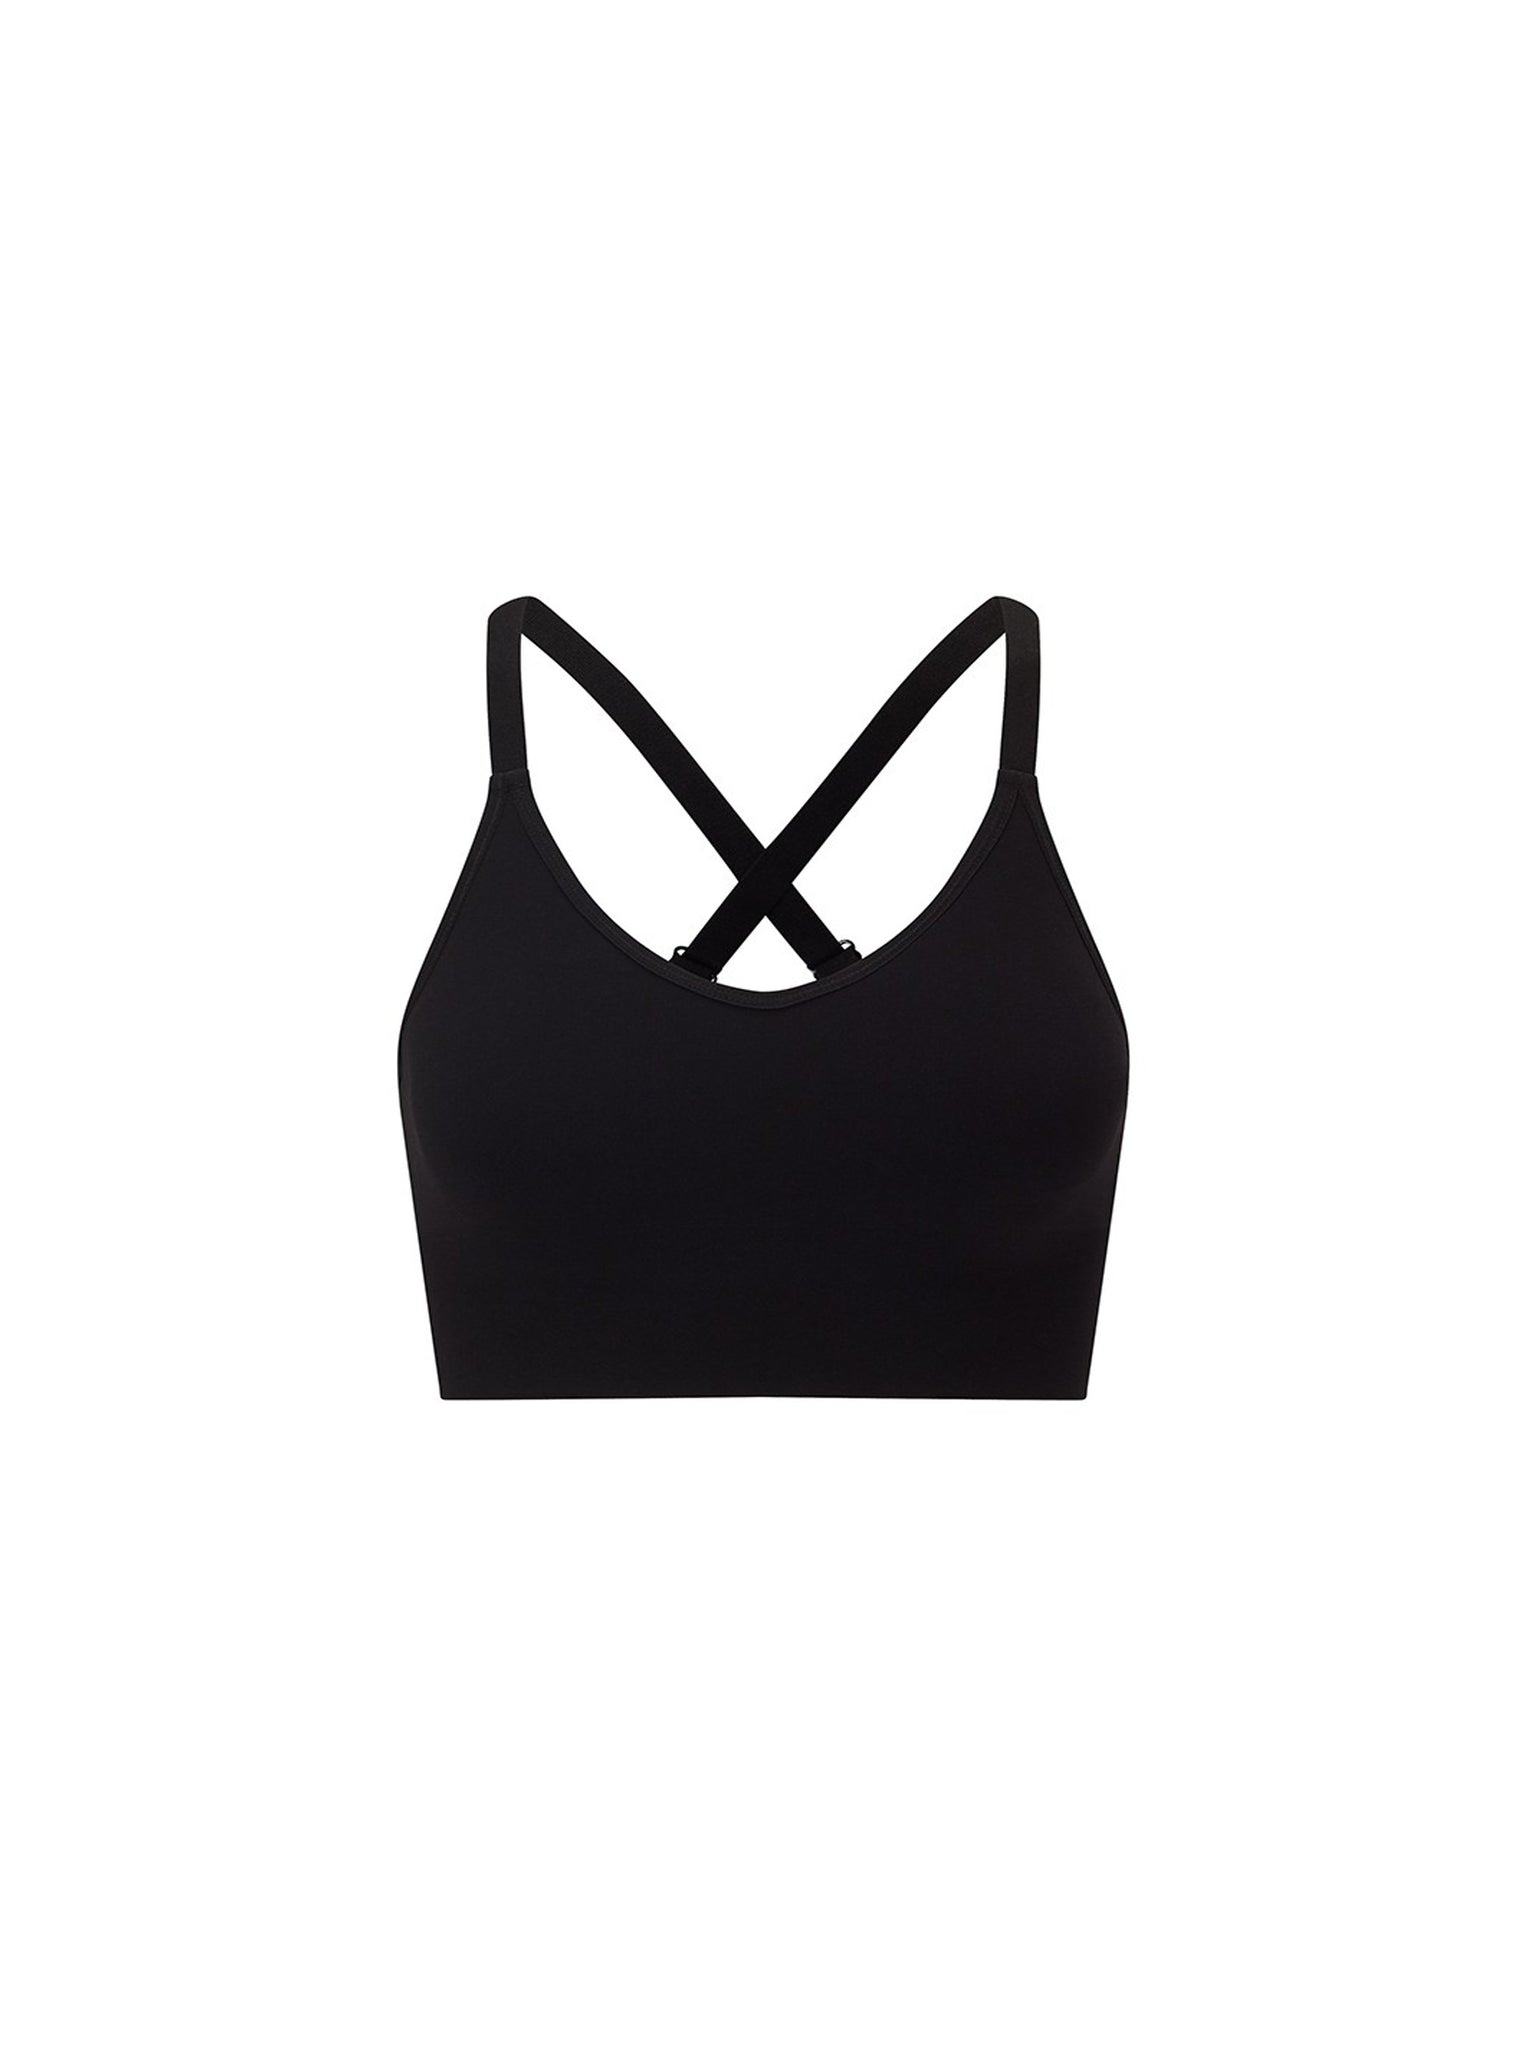 technical knit sports bra in black with padded removable cups and adjustable straps